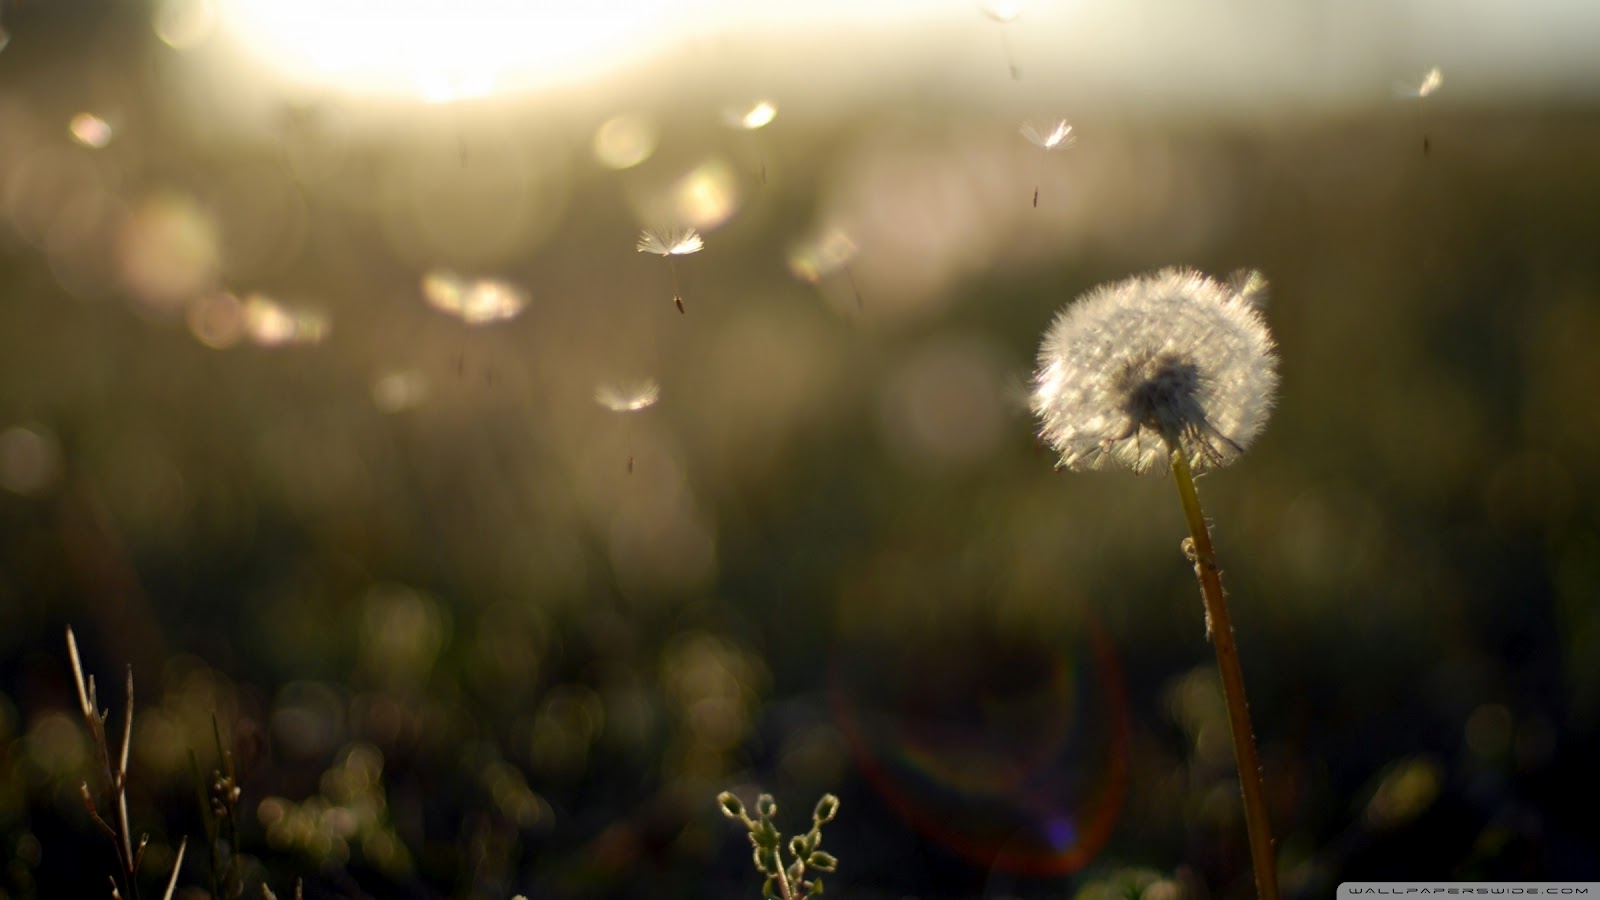 pk wallpaper zone provides you the Dandelion Flowers Wallpapers.You ...